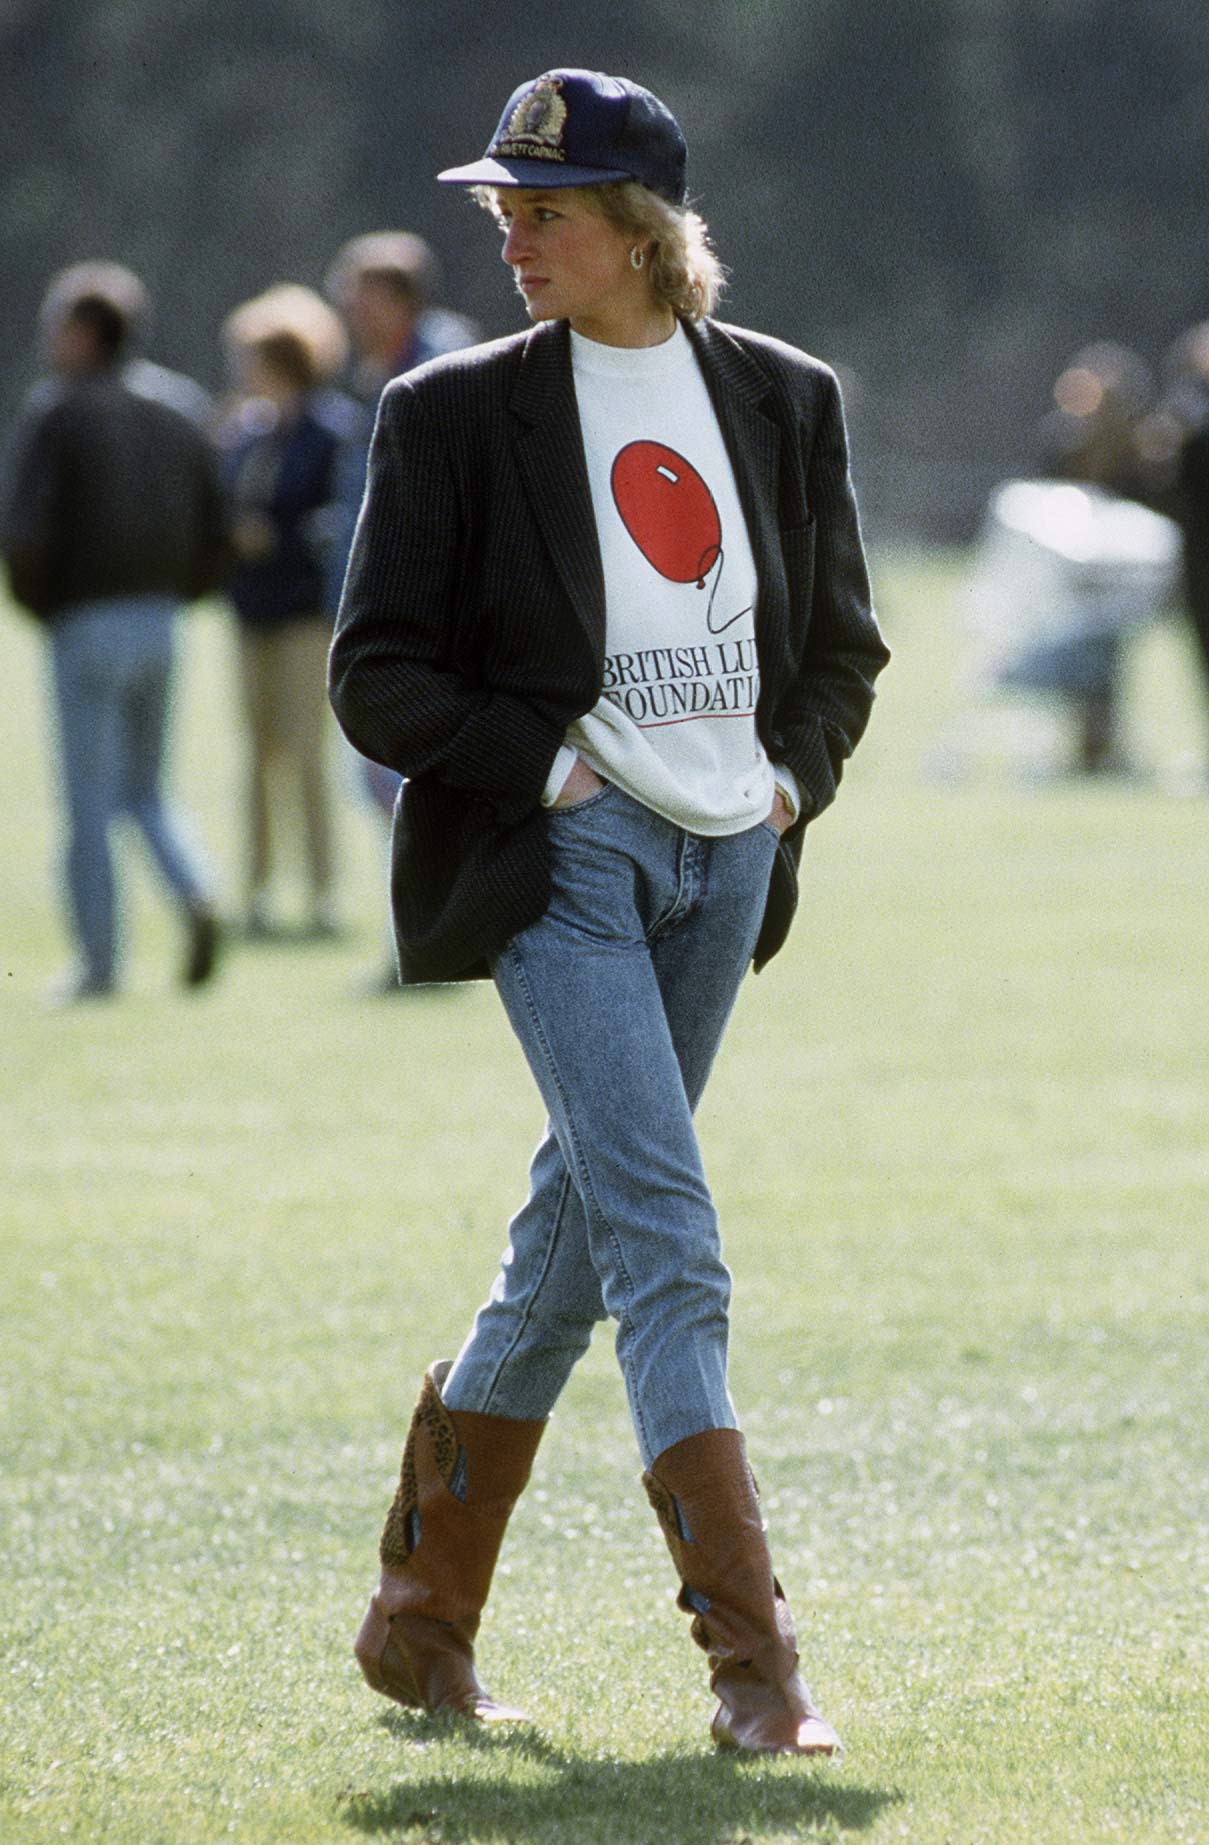 While at the Guards Polo Club in 1988, the princess proved that she could do off-duty style as well as formal wear when she paired jeans and a sweatshirt with an oversized blazer. A baseball cap was the perfect insouciant accessory.